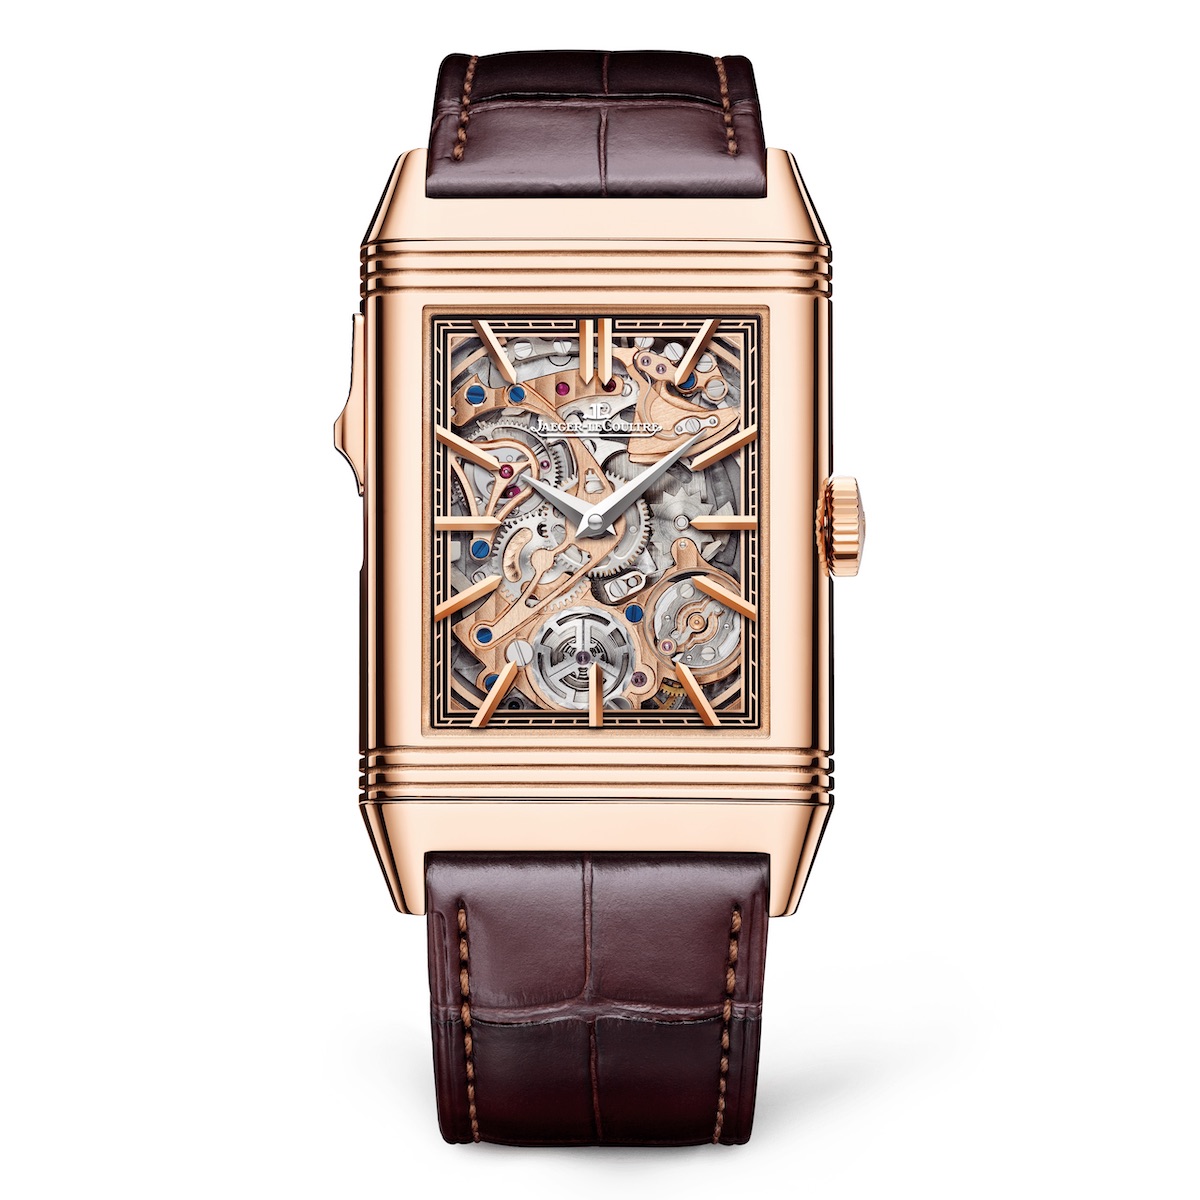 Jaeger-LeCoultre Reverso Tribute Minute Repeater watch